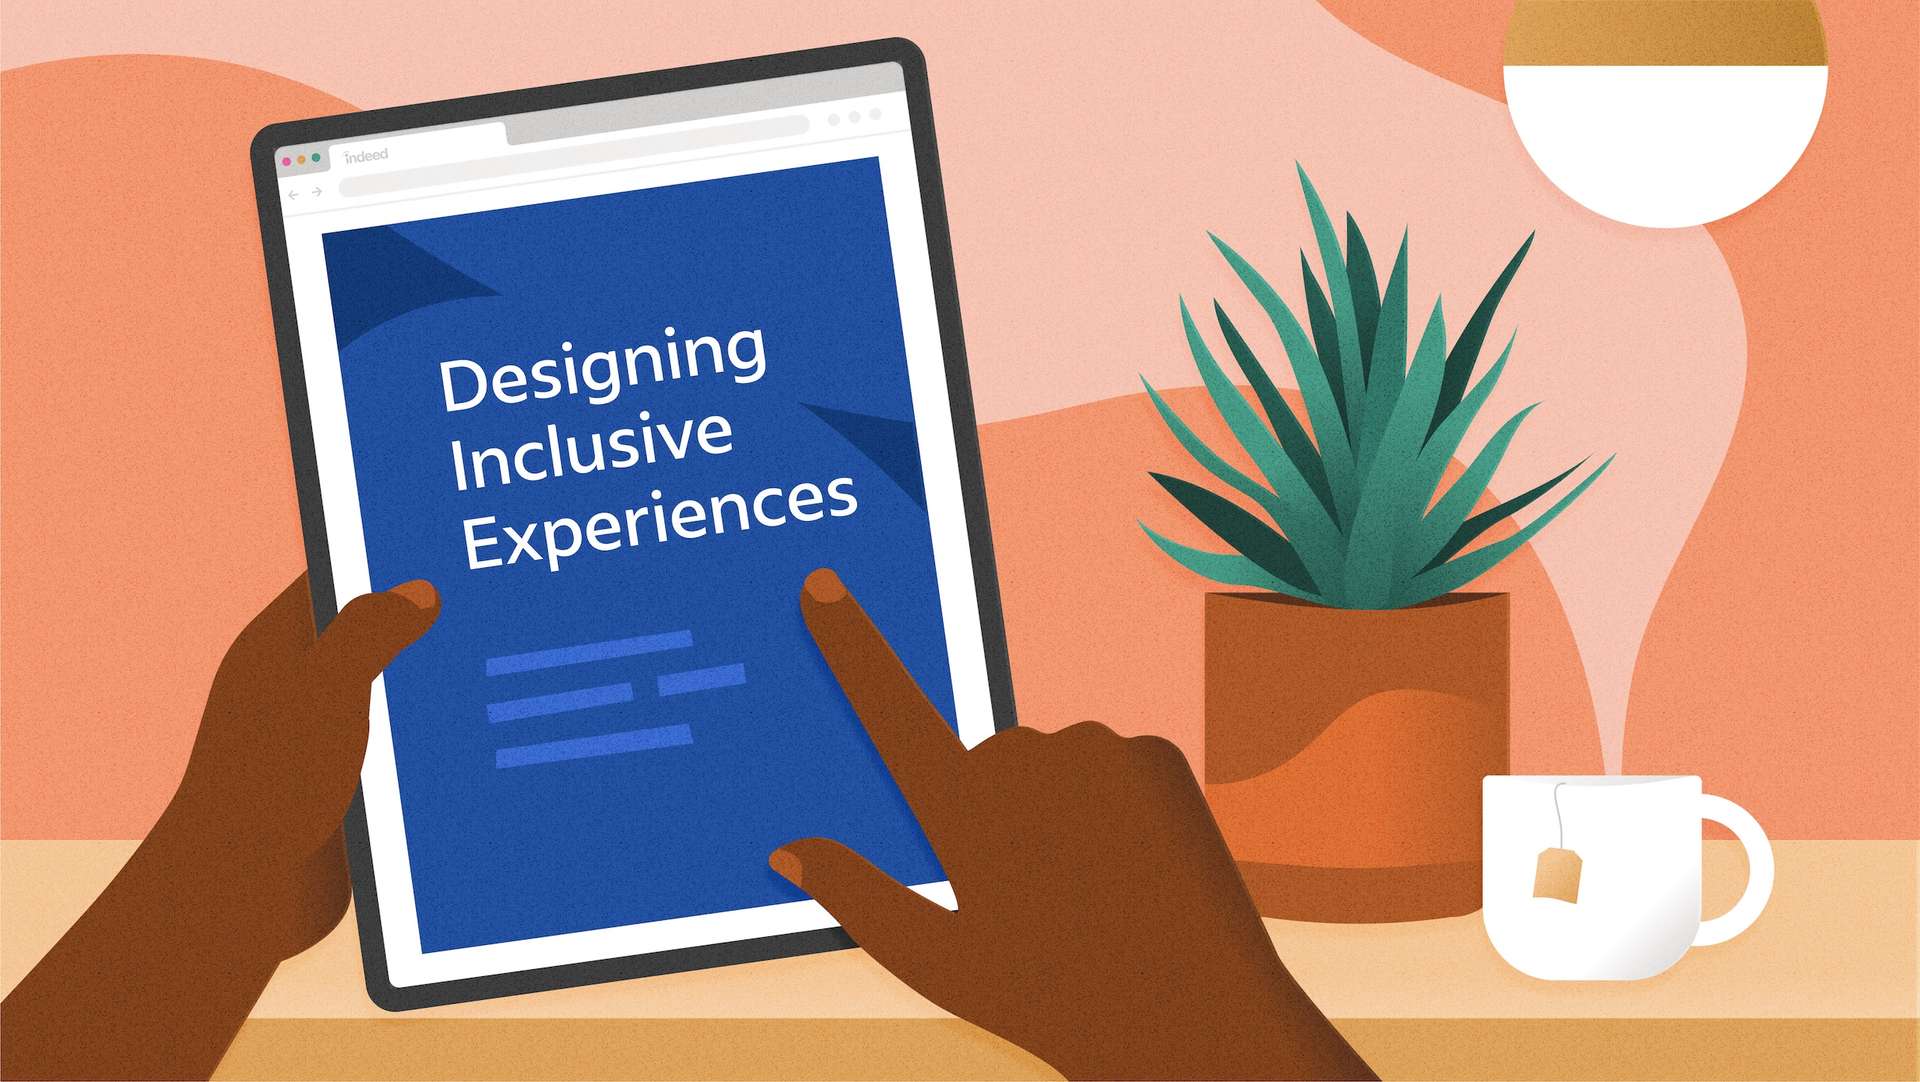 Against a background with a plant, a coffee cup, and a light, hands hold a tablet displaying the title of a Designing Inclusive Experiences guide